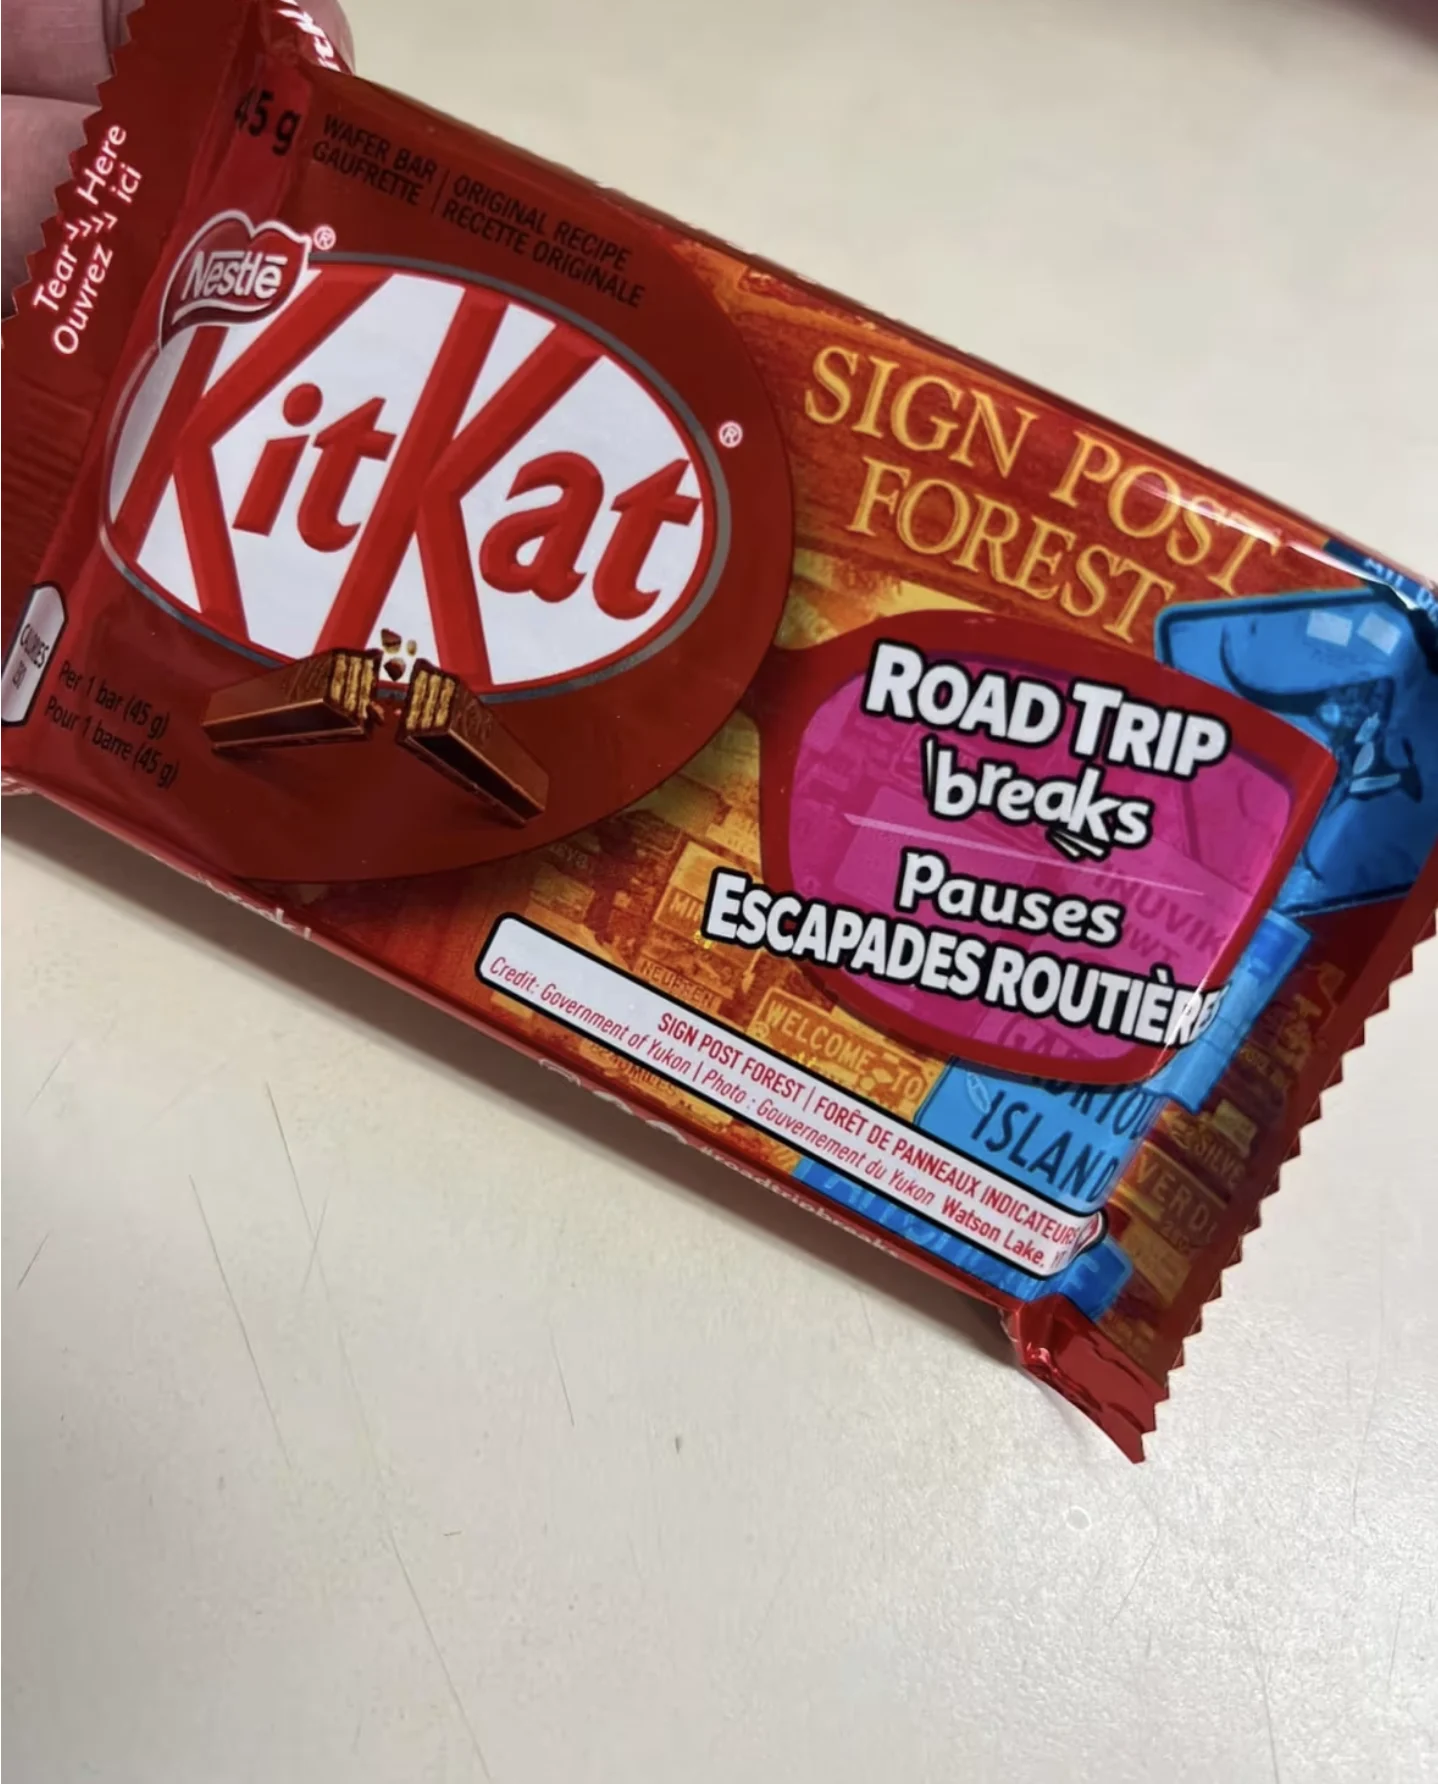 CBC: Watson Lake's mayor said he had no idea the attraction was on the candy bar wrapper until he saw it at a store in his community. (Kaitlyn McCulloch via CBC) - 2